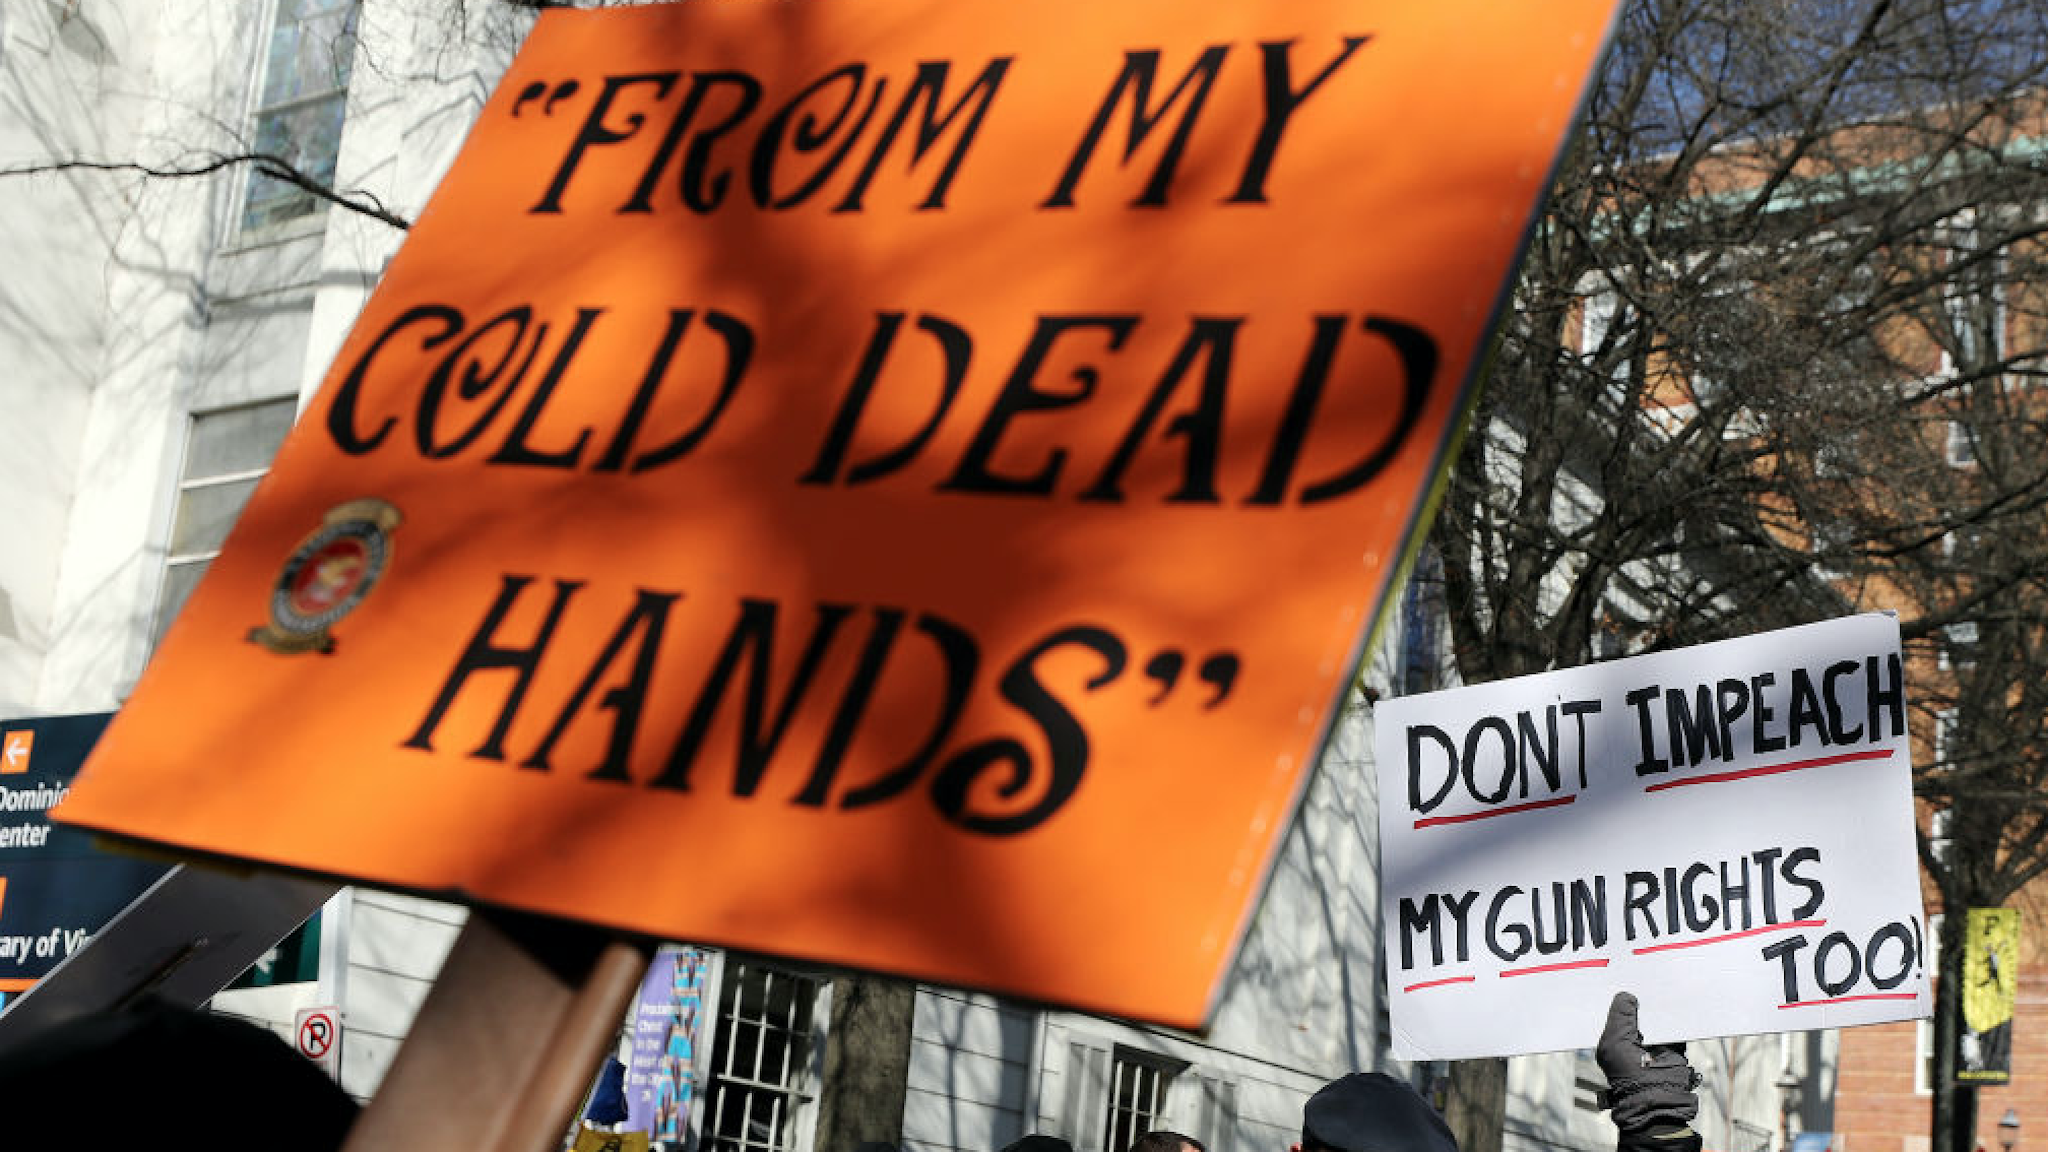 Thousands of gun rights advocates leave a rally organized by The Virginia Citizens Defense League on Capitol Square near the state capitol building January 20, 2020 in Richmond, Virginia.